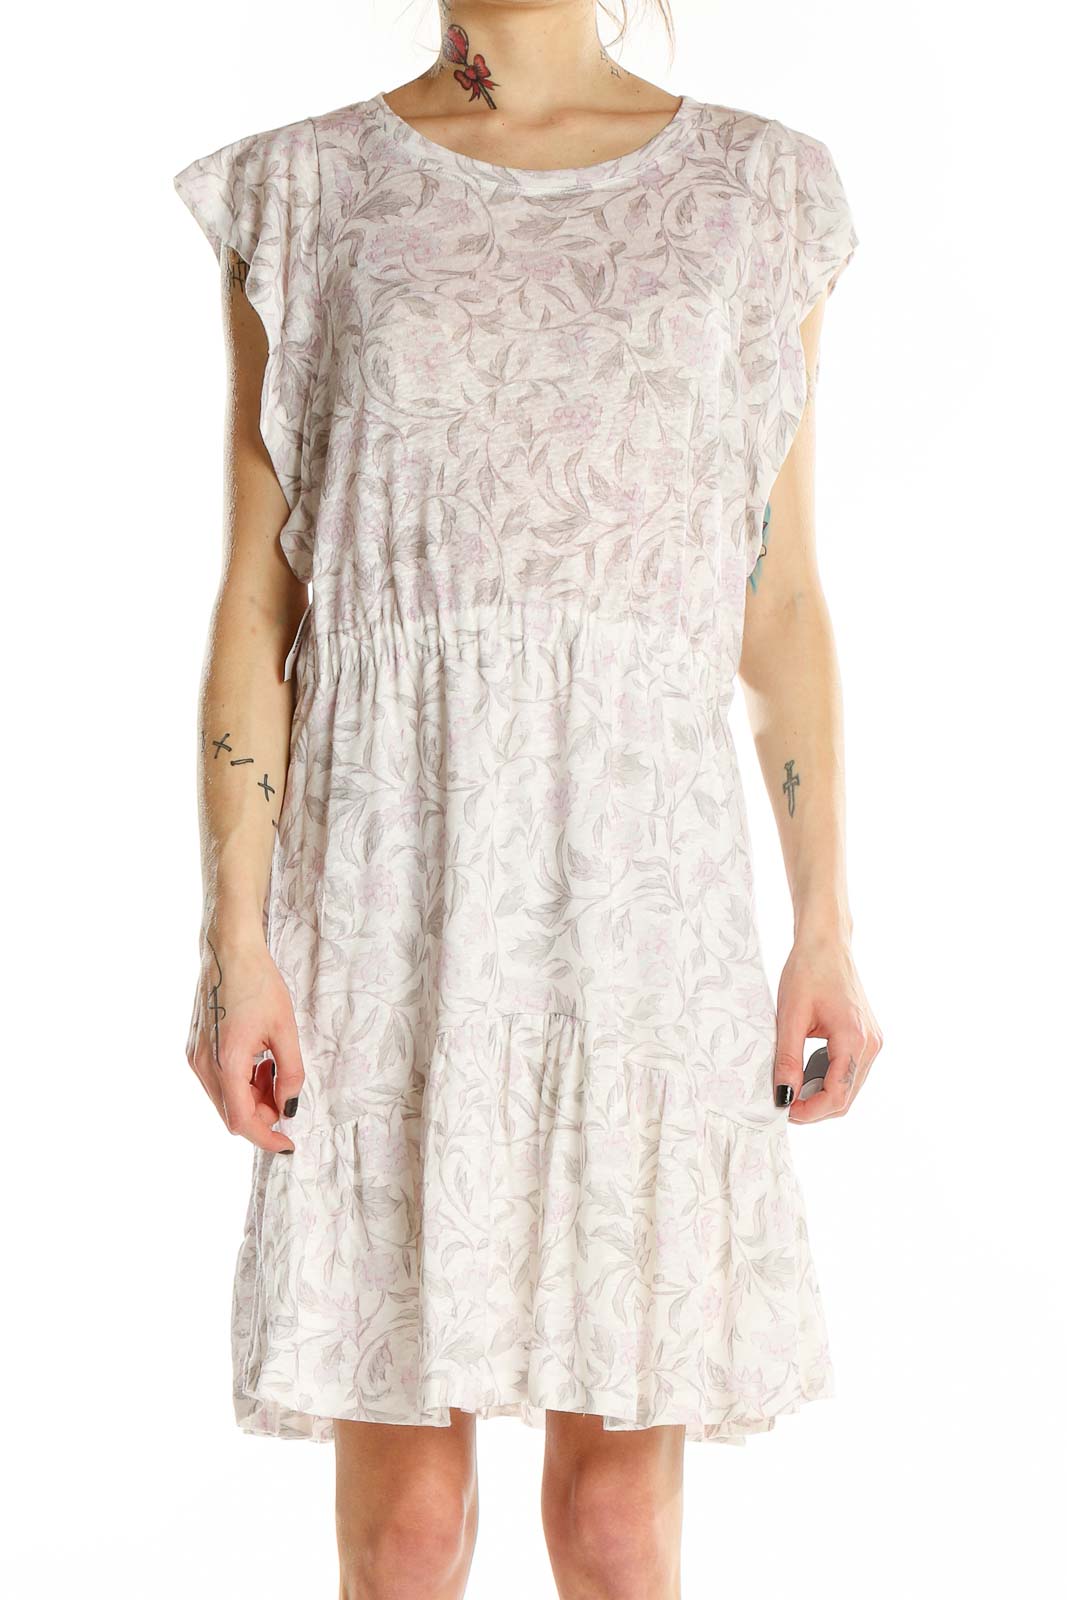 White Pink Floral Print Dress Front